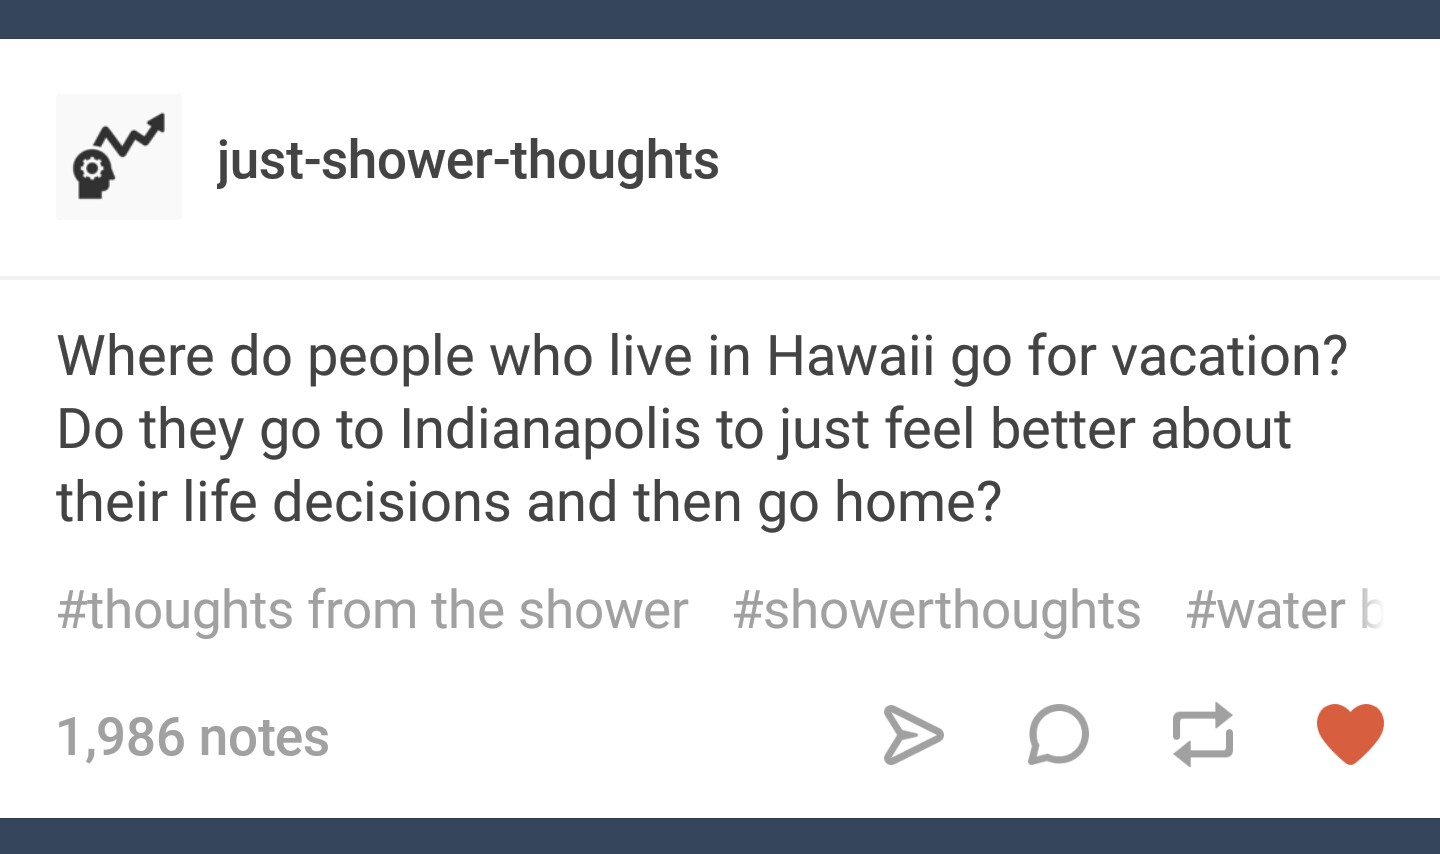 angle - one justshowerthoughts Where do people who live in Hawaii go for vacation? Do they go to Indianapolis to just feel better about their life decisions and then go home? from the shower b 1,986 notes